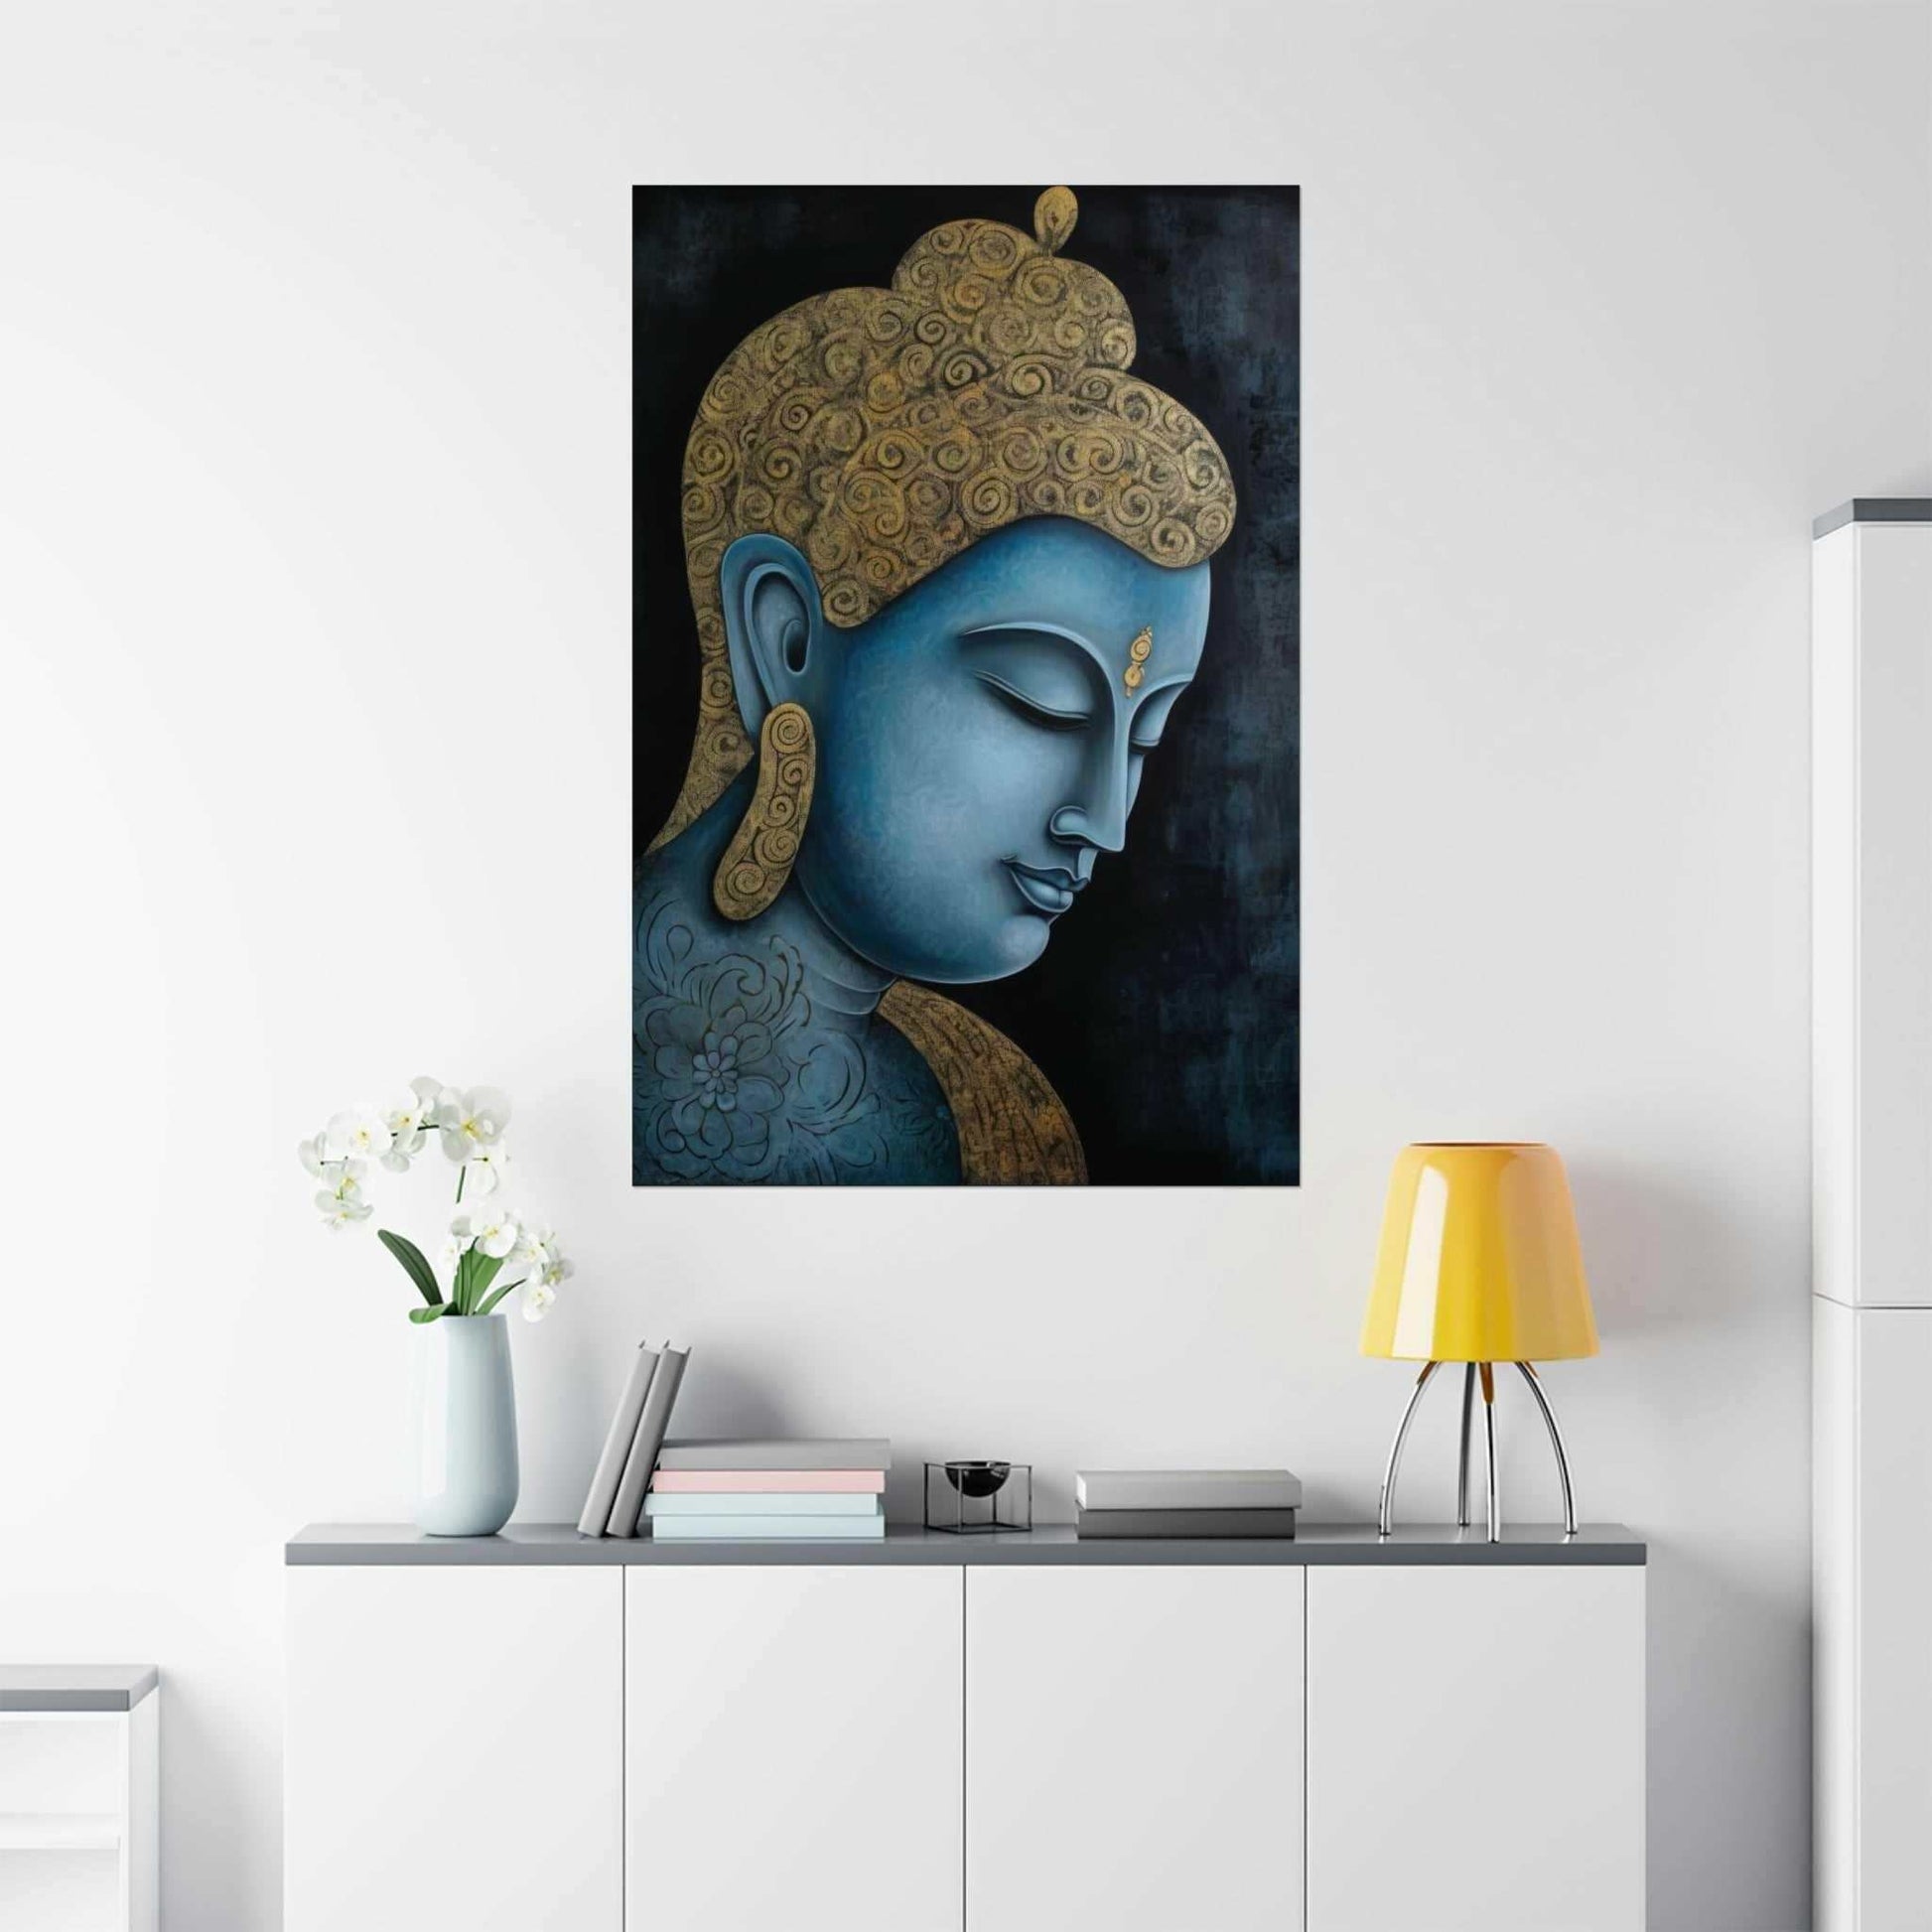 Zen Art Posters Louisiana from ZenArtBliss.com depicting an abstract blue and gold Buddha, embodying the state's serene essence on matte paper.